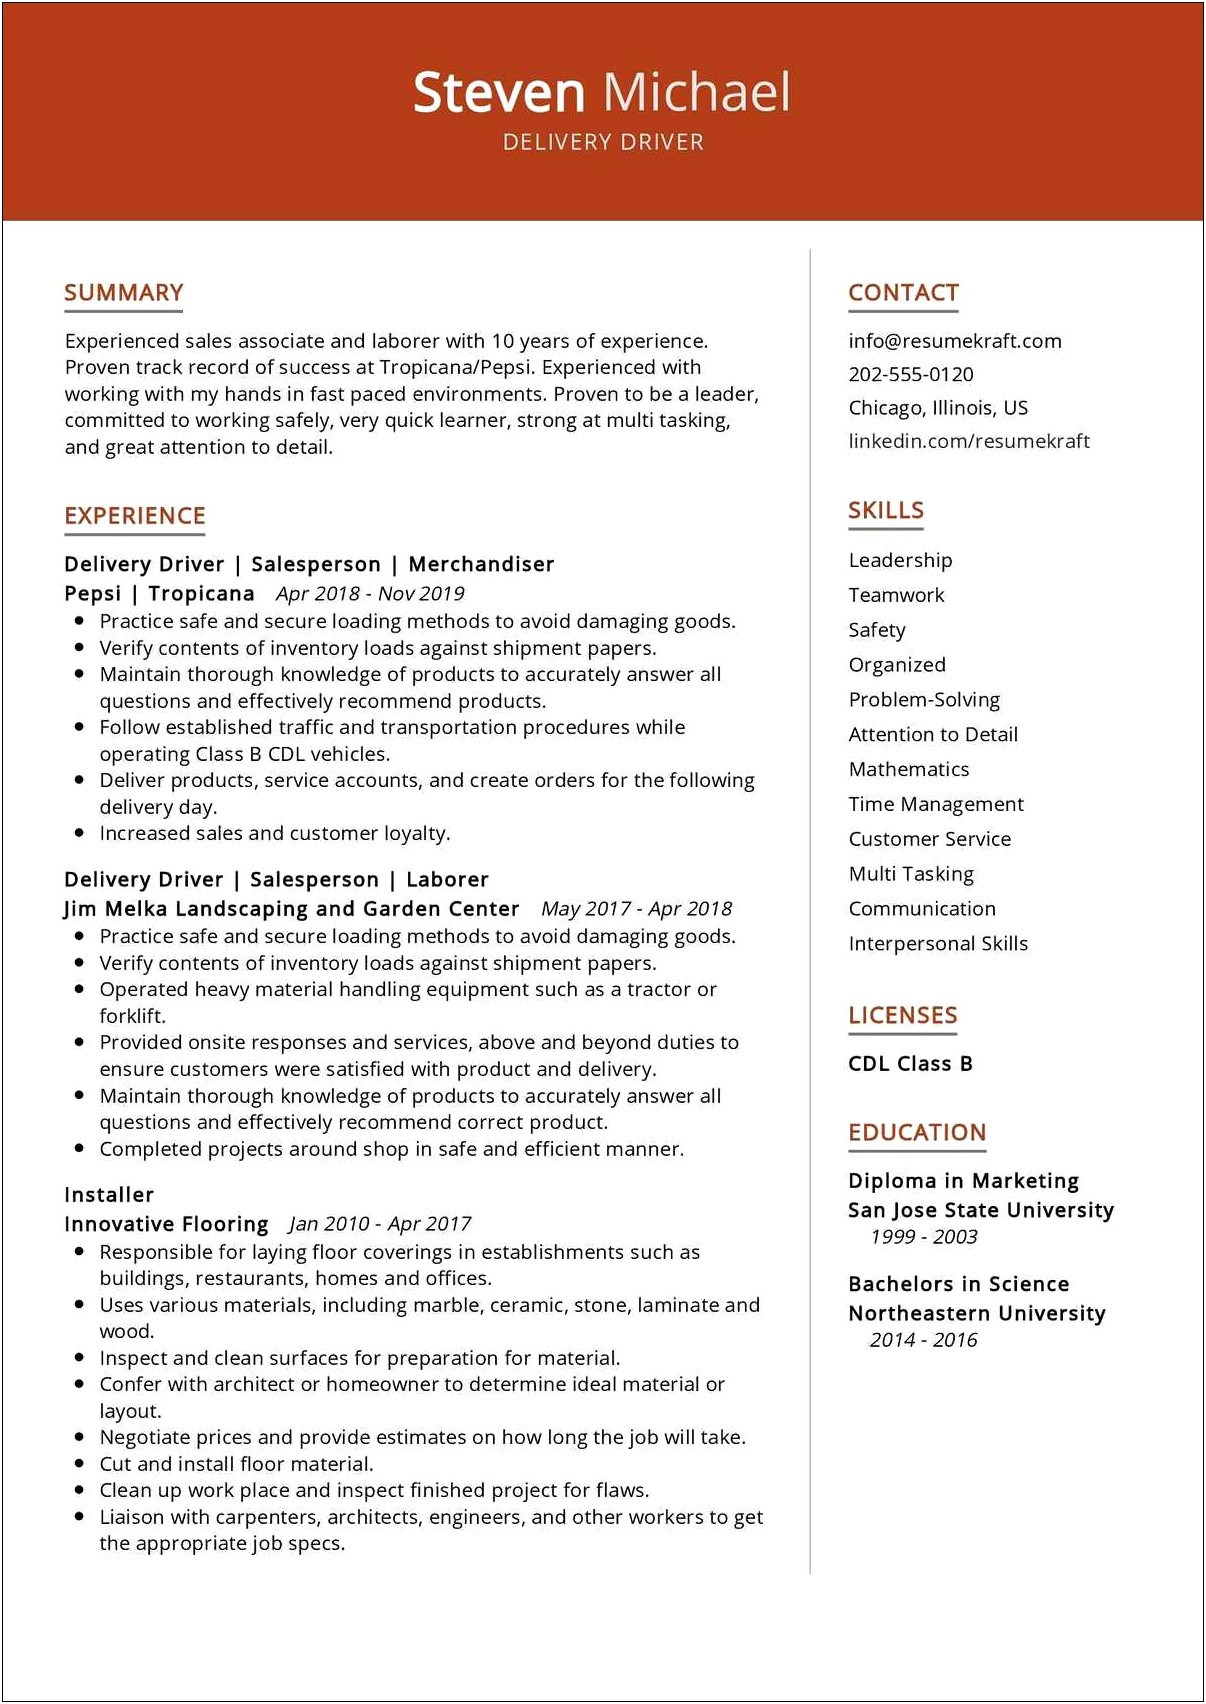 Is New Courier Good For A Resume